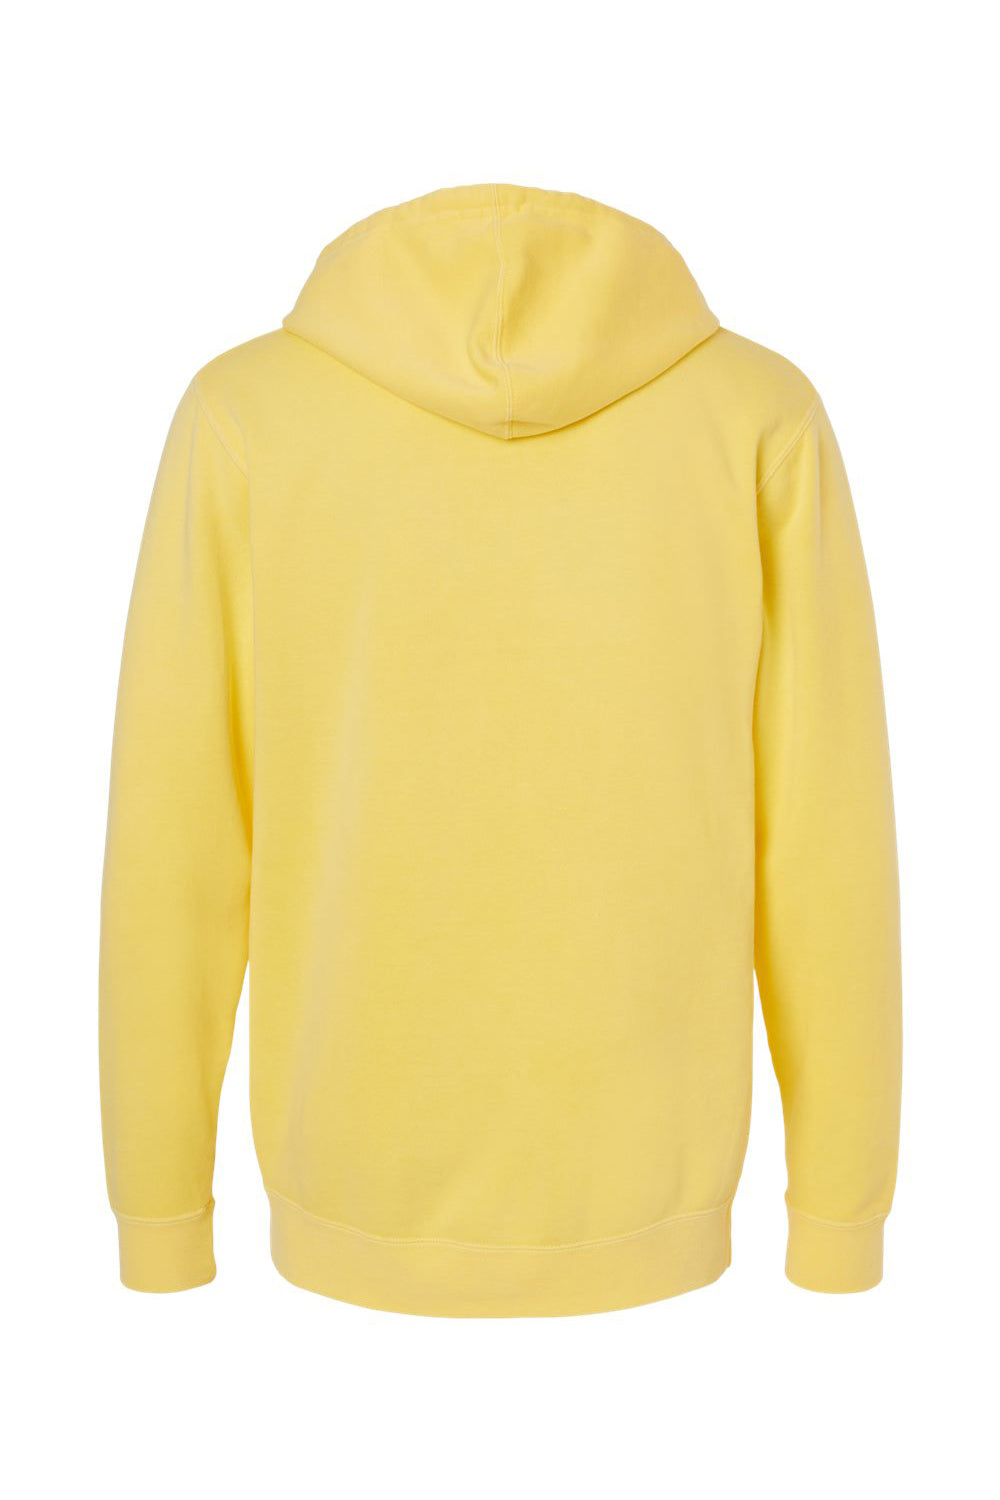 Independent Trading Co. PRM4500 Mens Pigment Dyed Hooded Sweatshirt Hoodie Yellow Flat Back